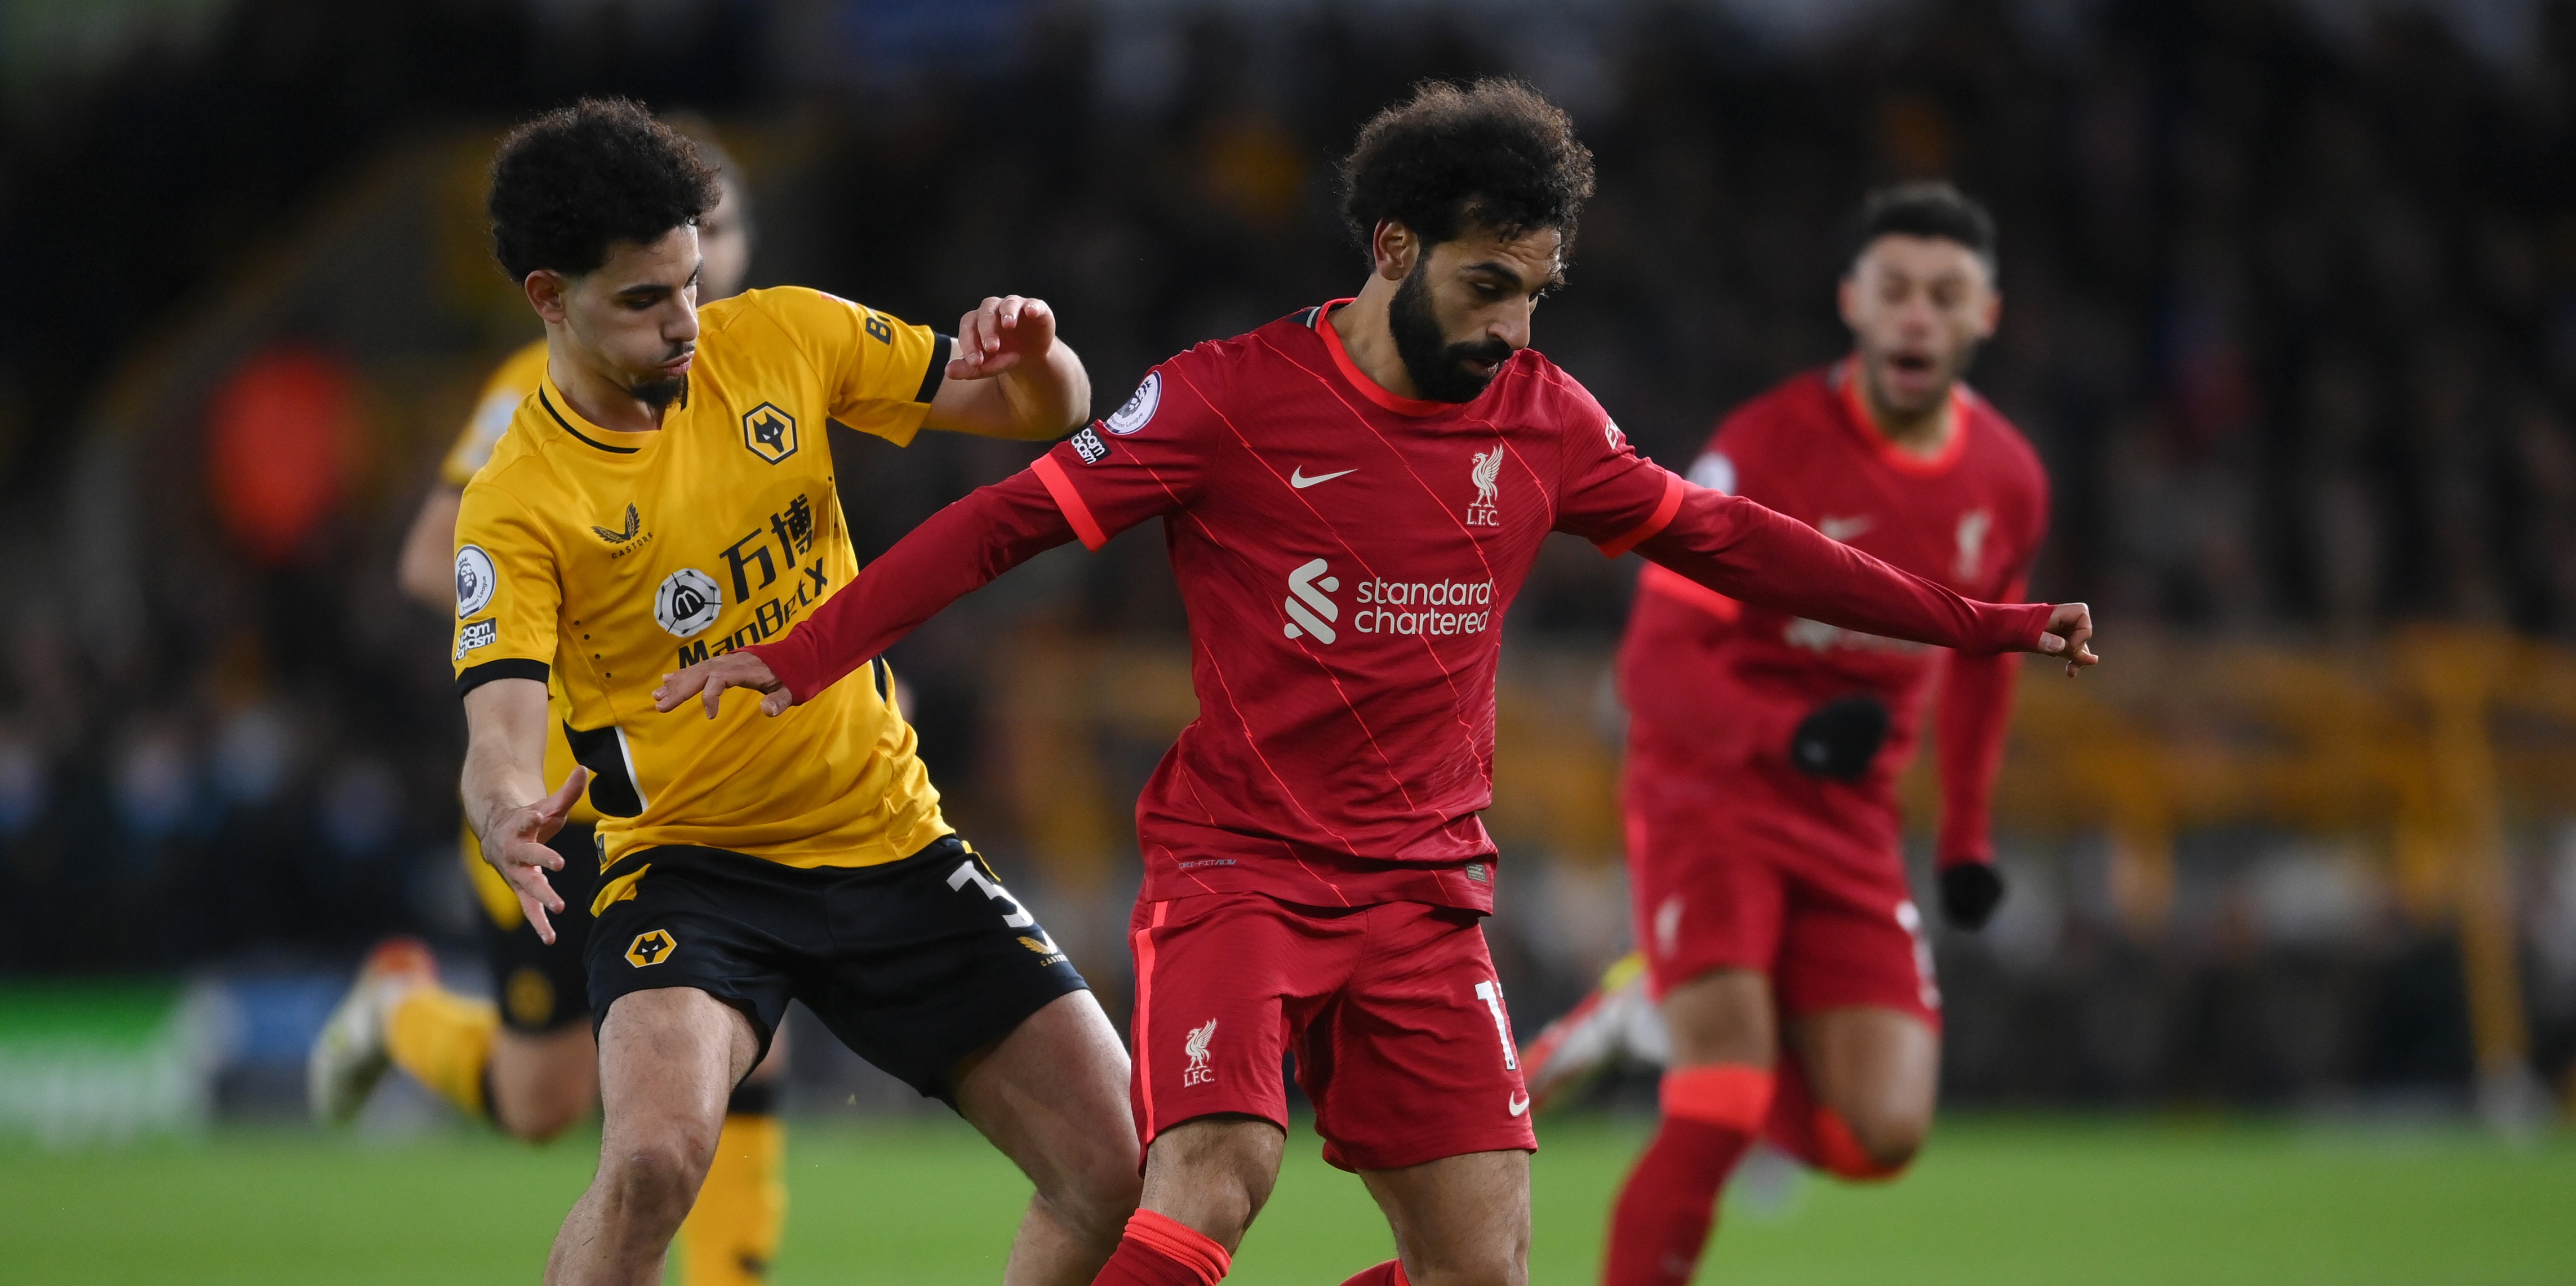 James Pearce shares ‘the bad news’ from Wolves clash but Liverpool fans won’t mind after Origi’s late winner